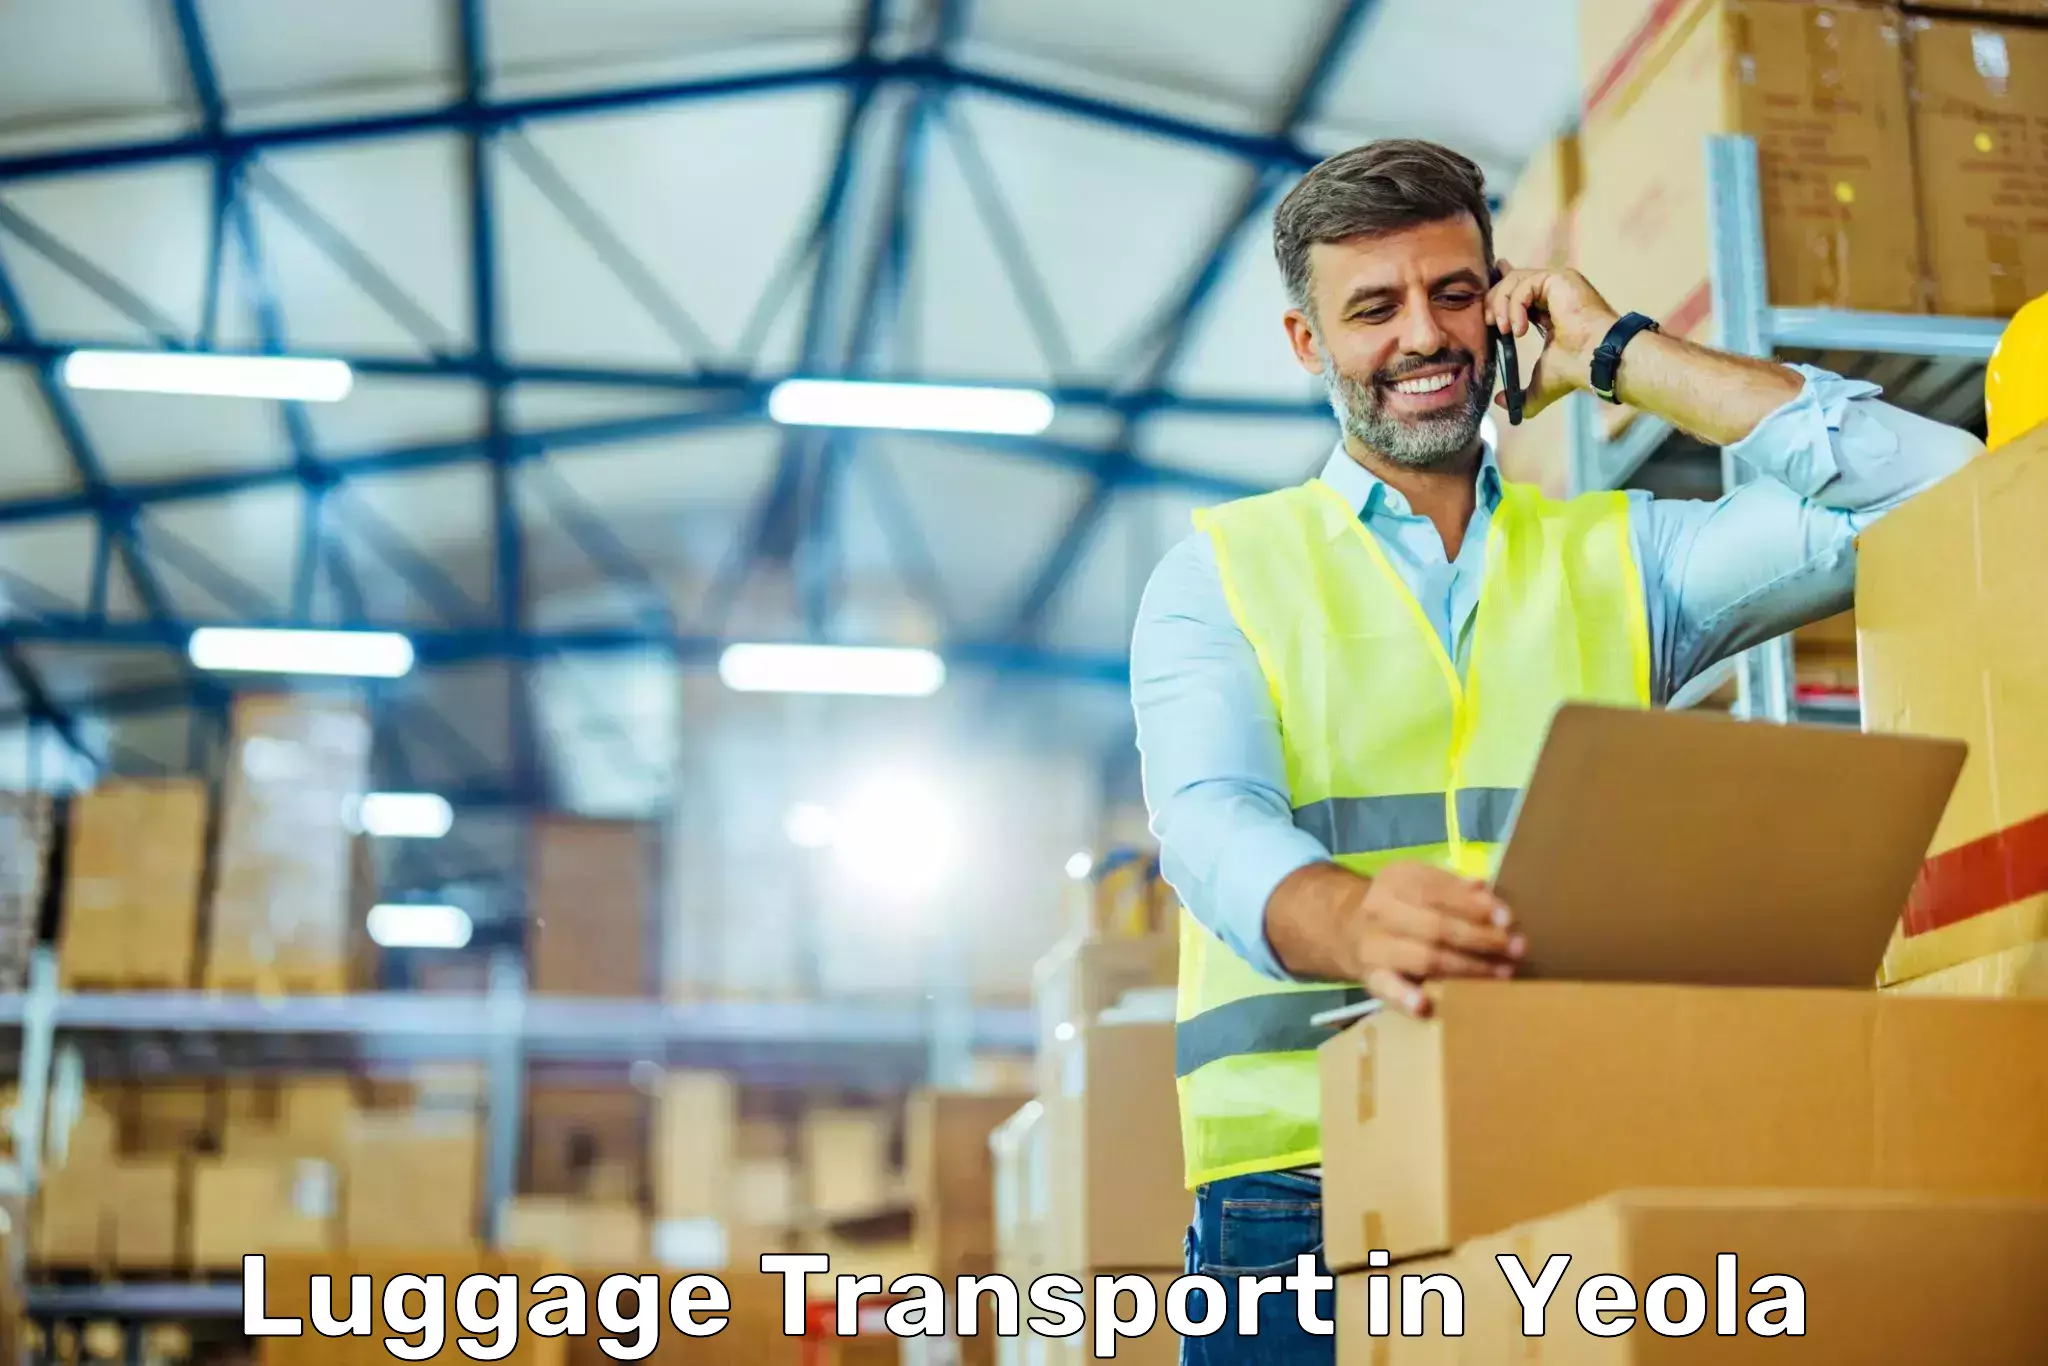 Baggage transport updates in Yeola